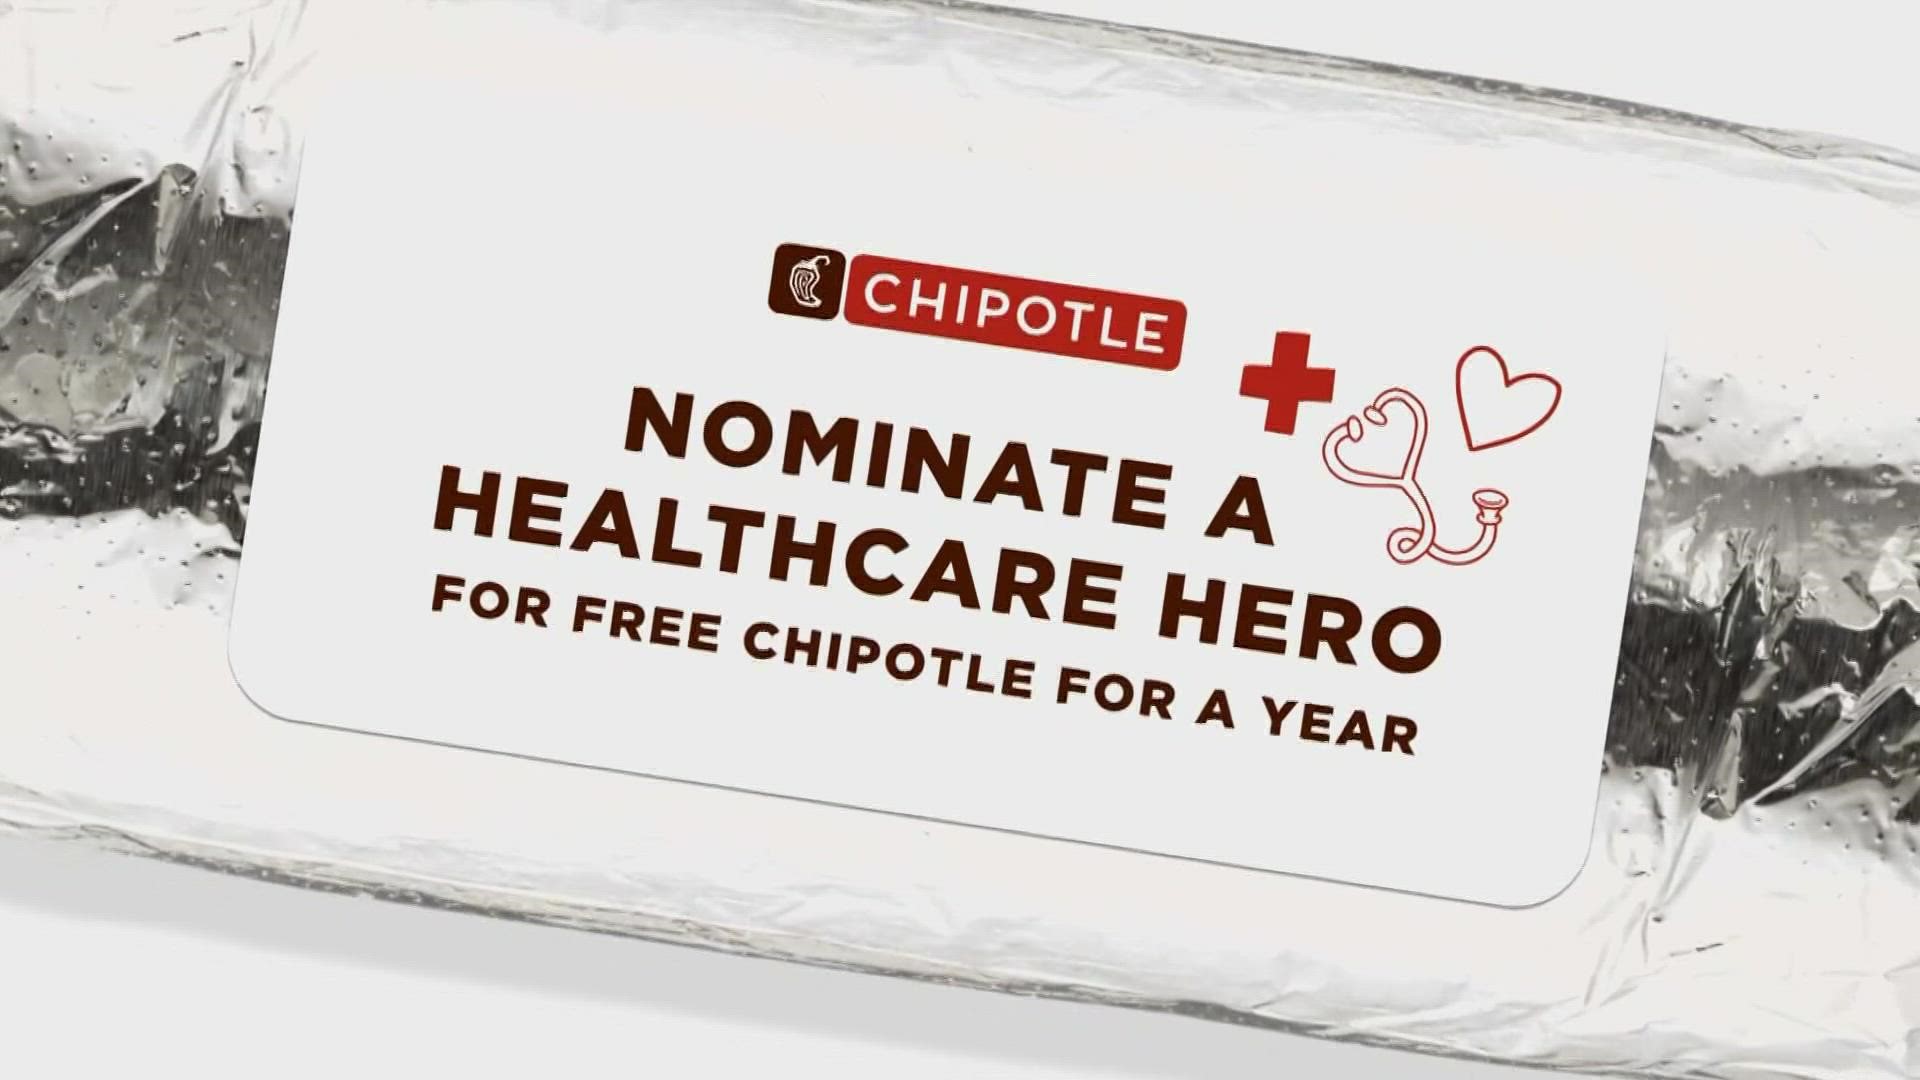 Free Chipotle?! Well, dang! Does that include the avocado?